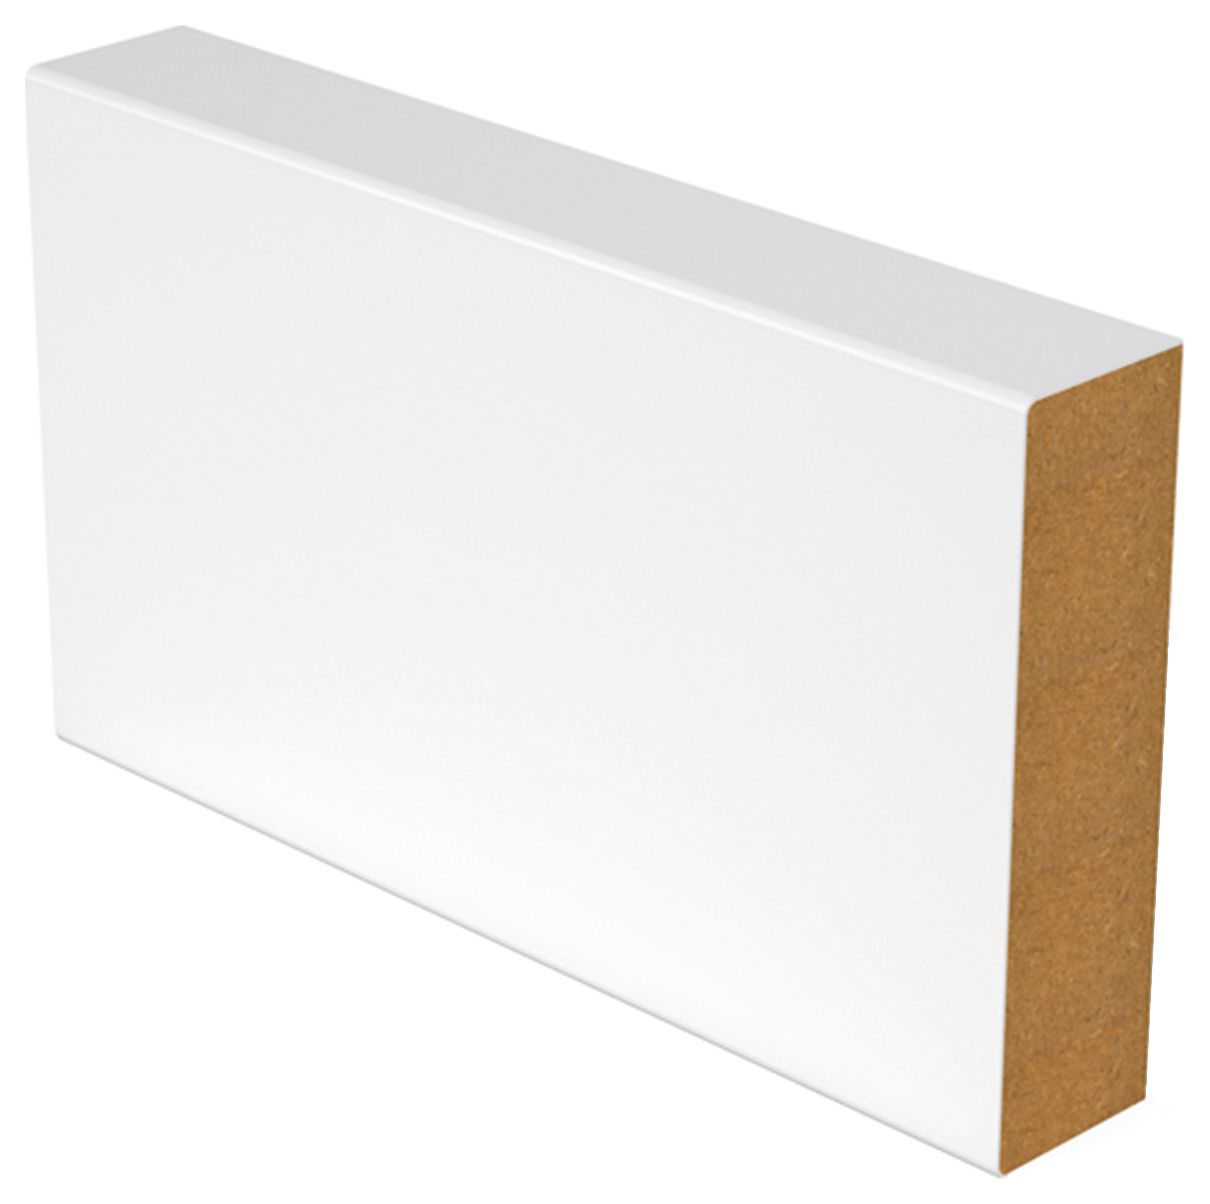 Image of Wickes Square Edge Skirting - 18 x 94 x 3660mm